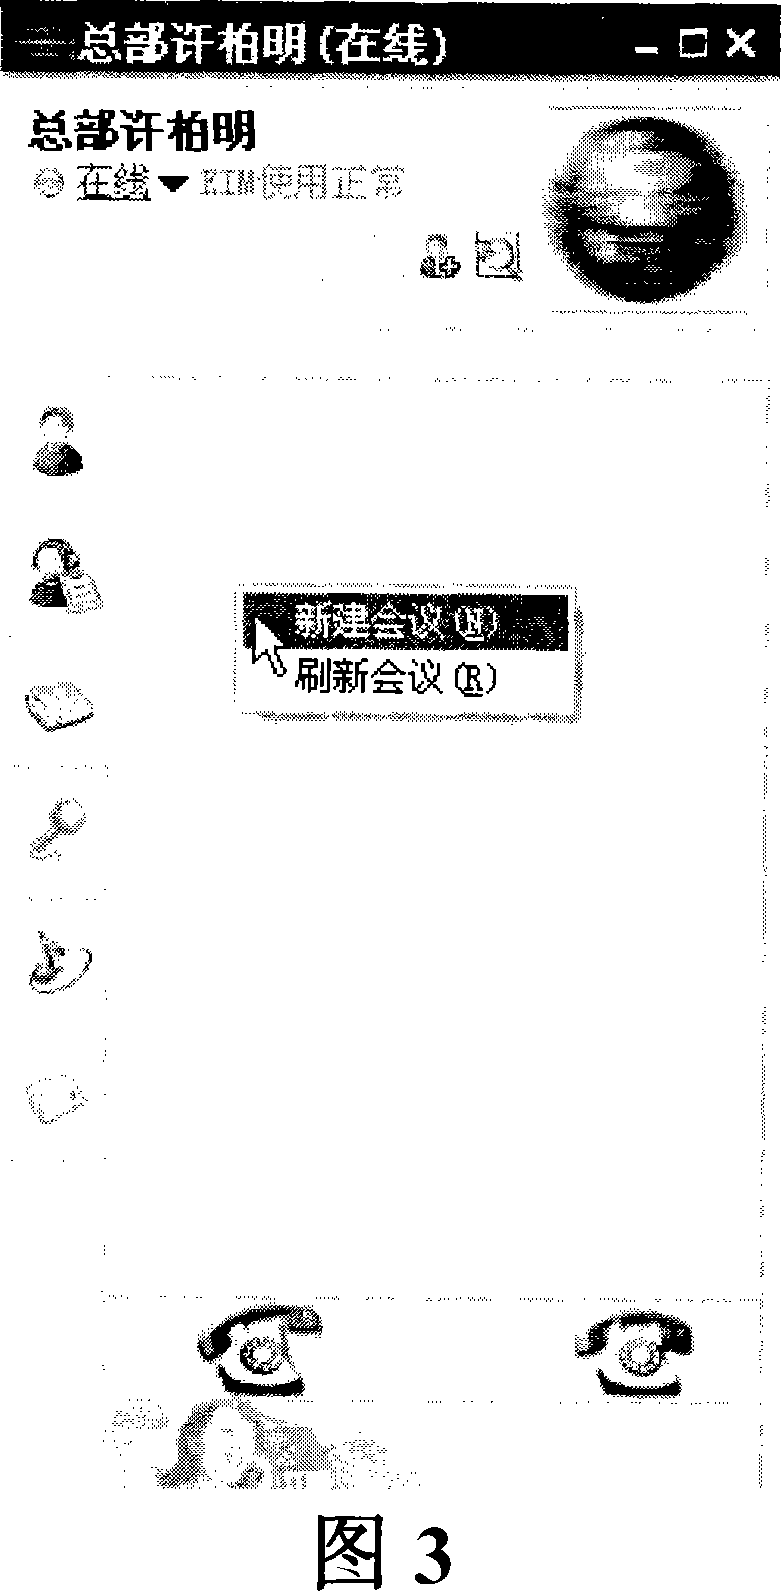 Method and system for implementing video session using instant message system